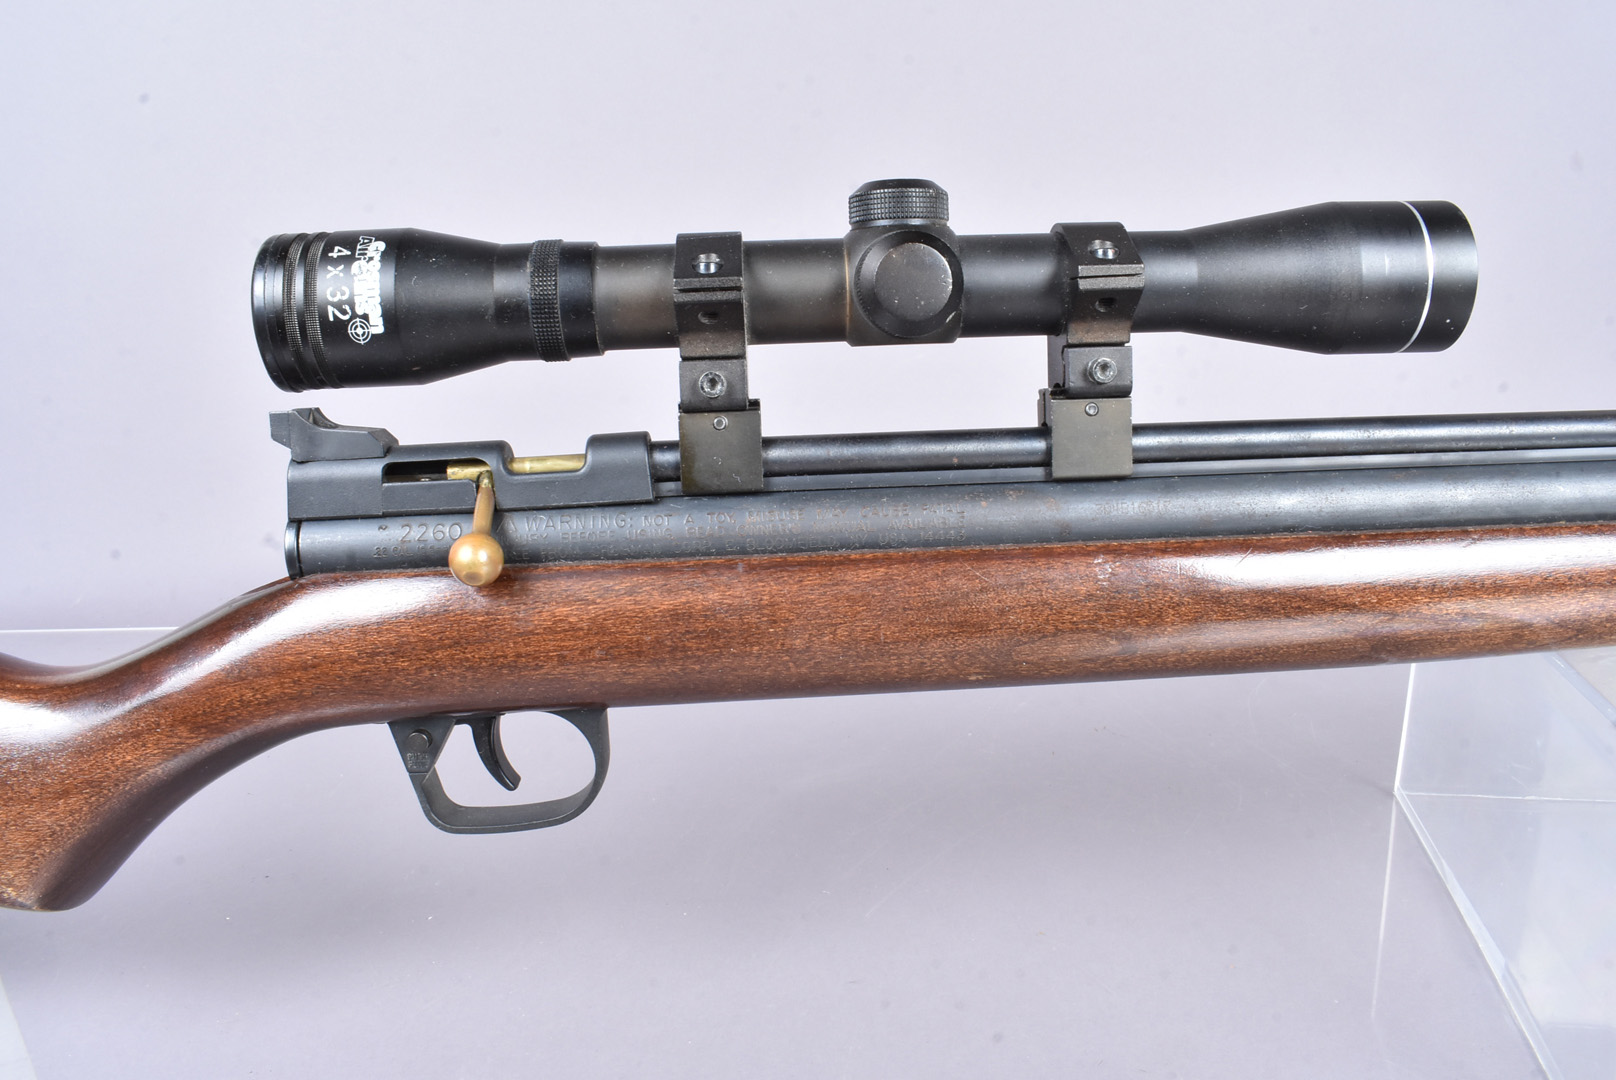 A Crosman 2260 .22 cal air rifle, complete with Crosman 4x32 scope sold as seen, untested